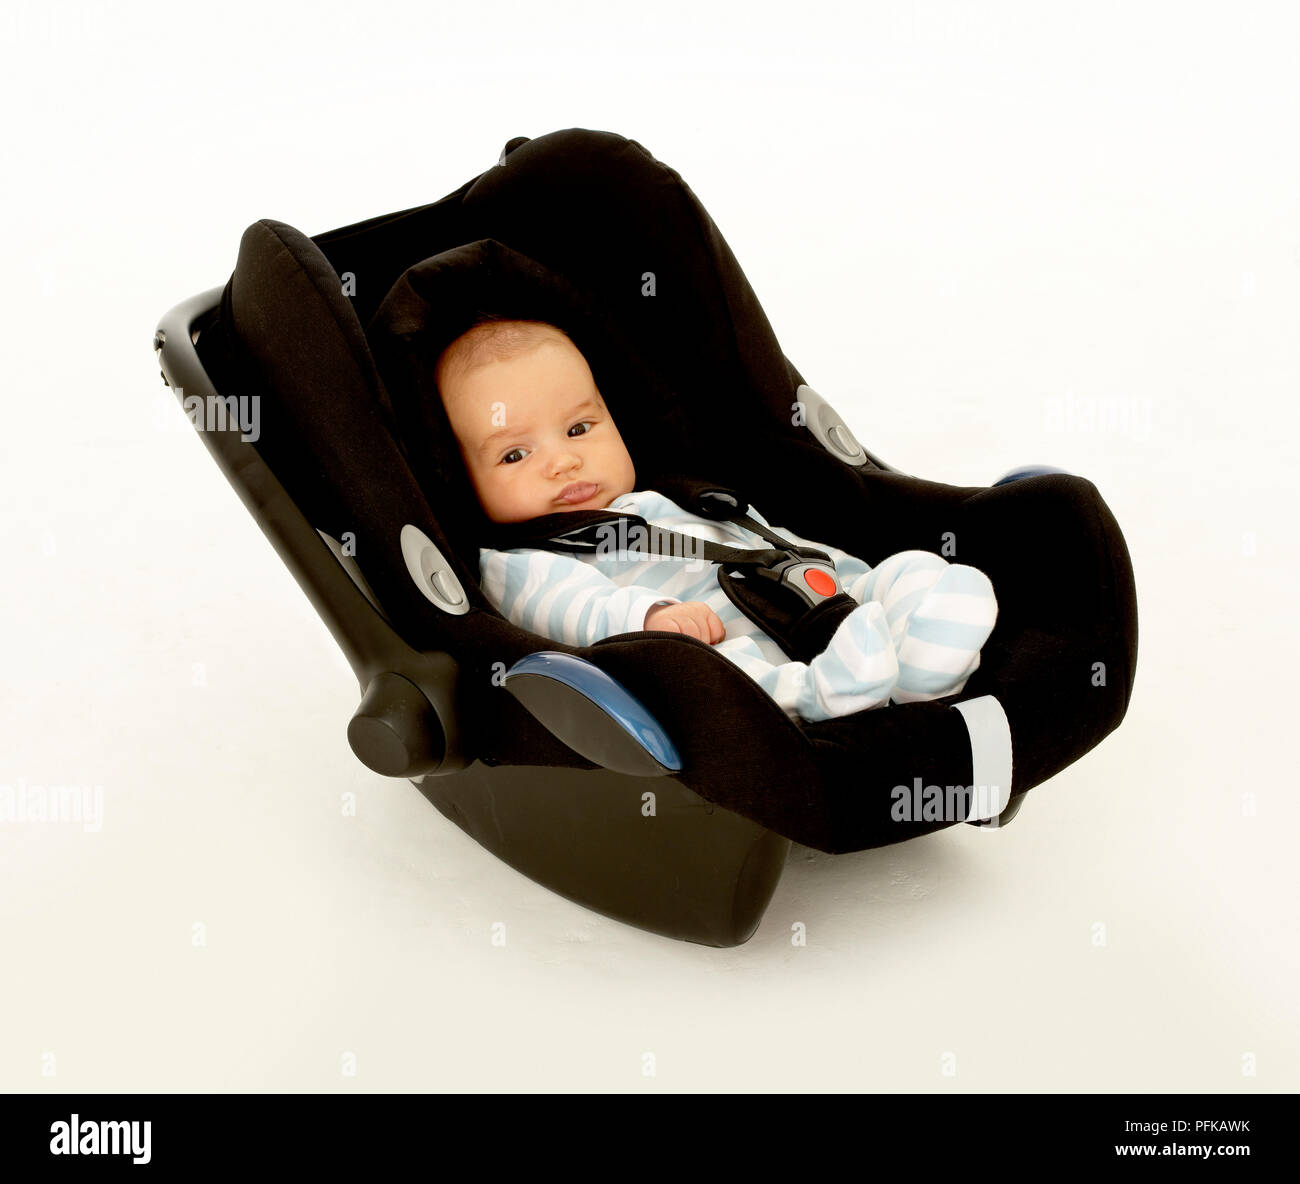 Baby boy strapped in seat Stock Photo